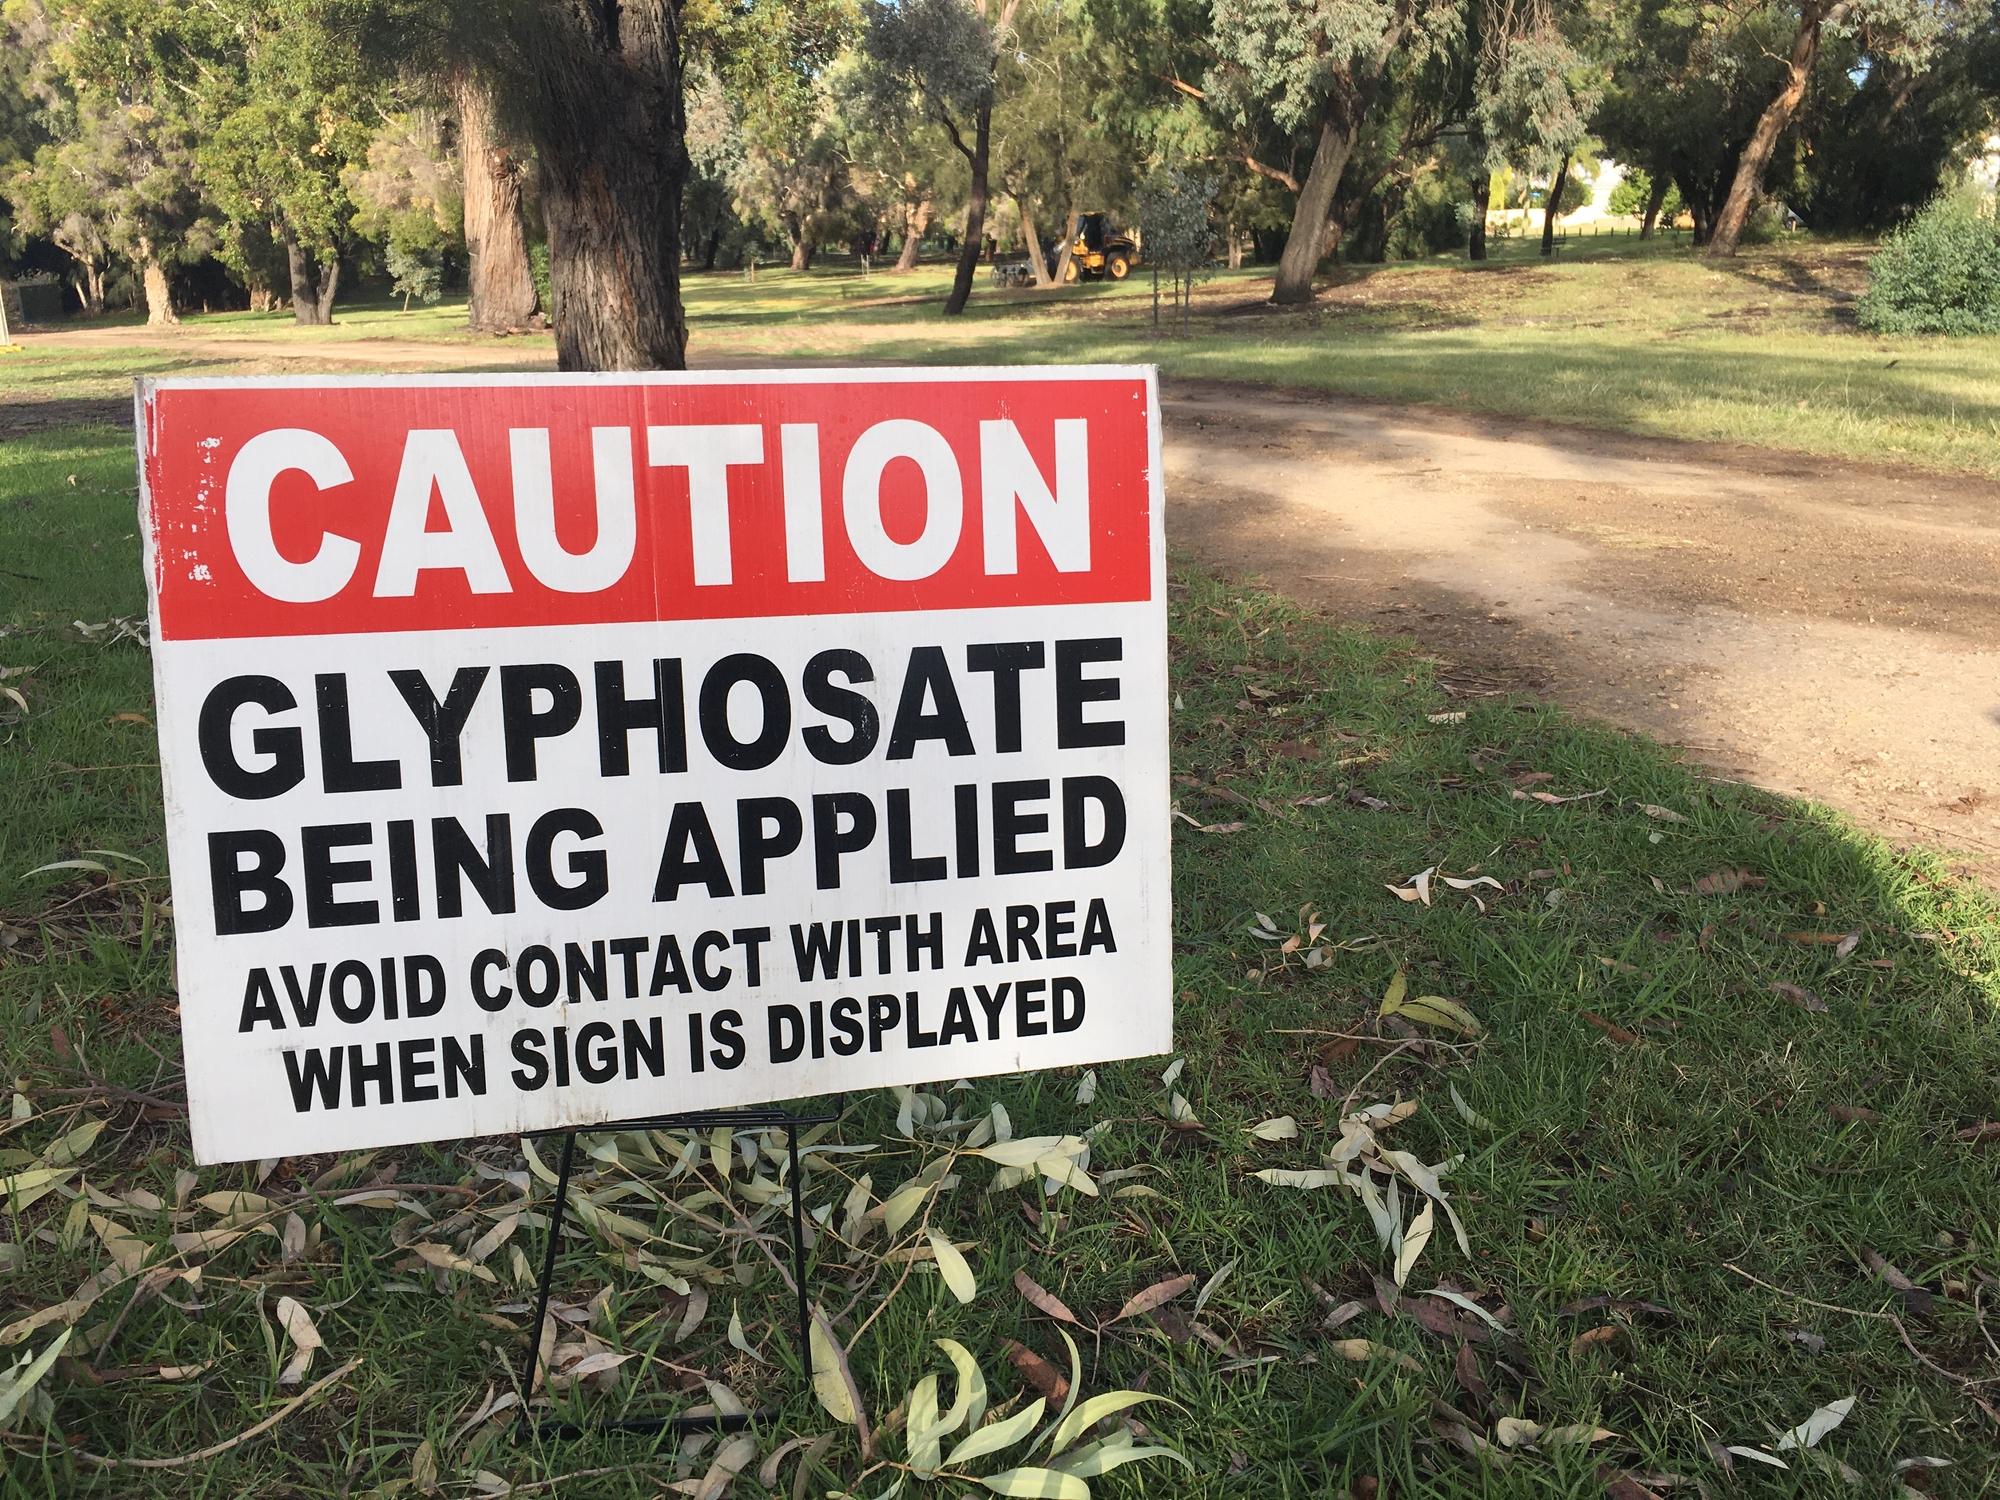 Children and wildlife should avoid entering areas that are being treated with Glyphosate for 24 hours or until dry - alternatives to glyphosate